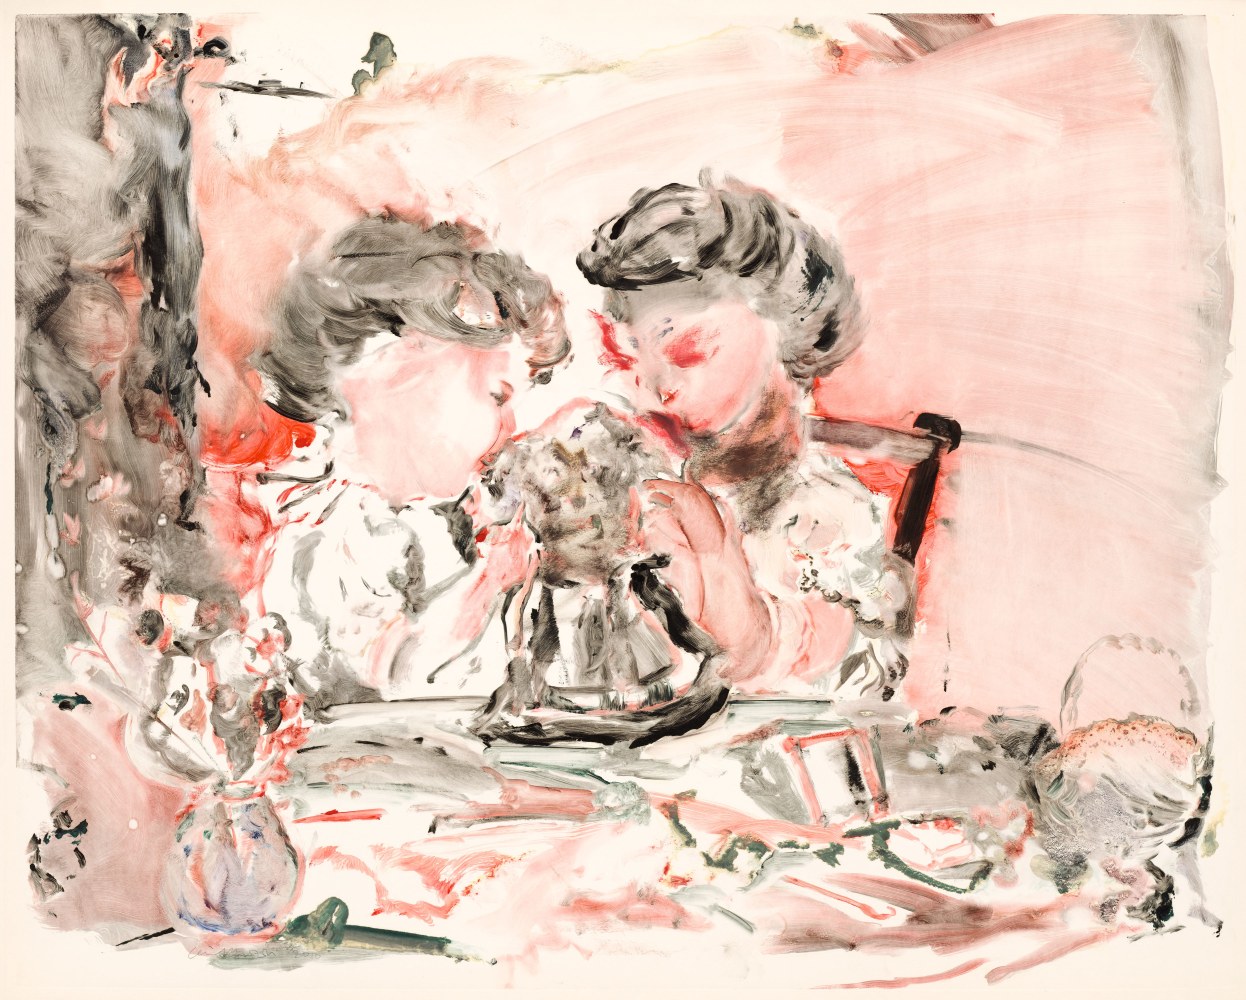 Cecily Brown, Untitled, 2010